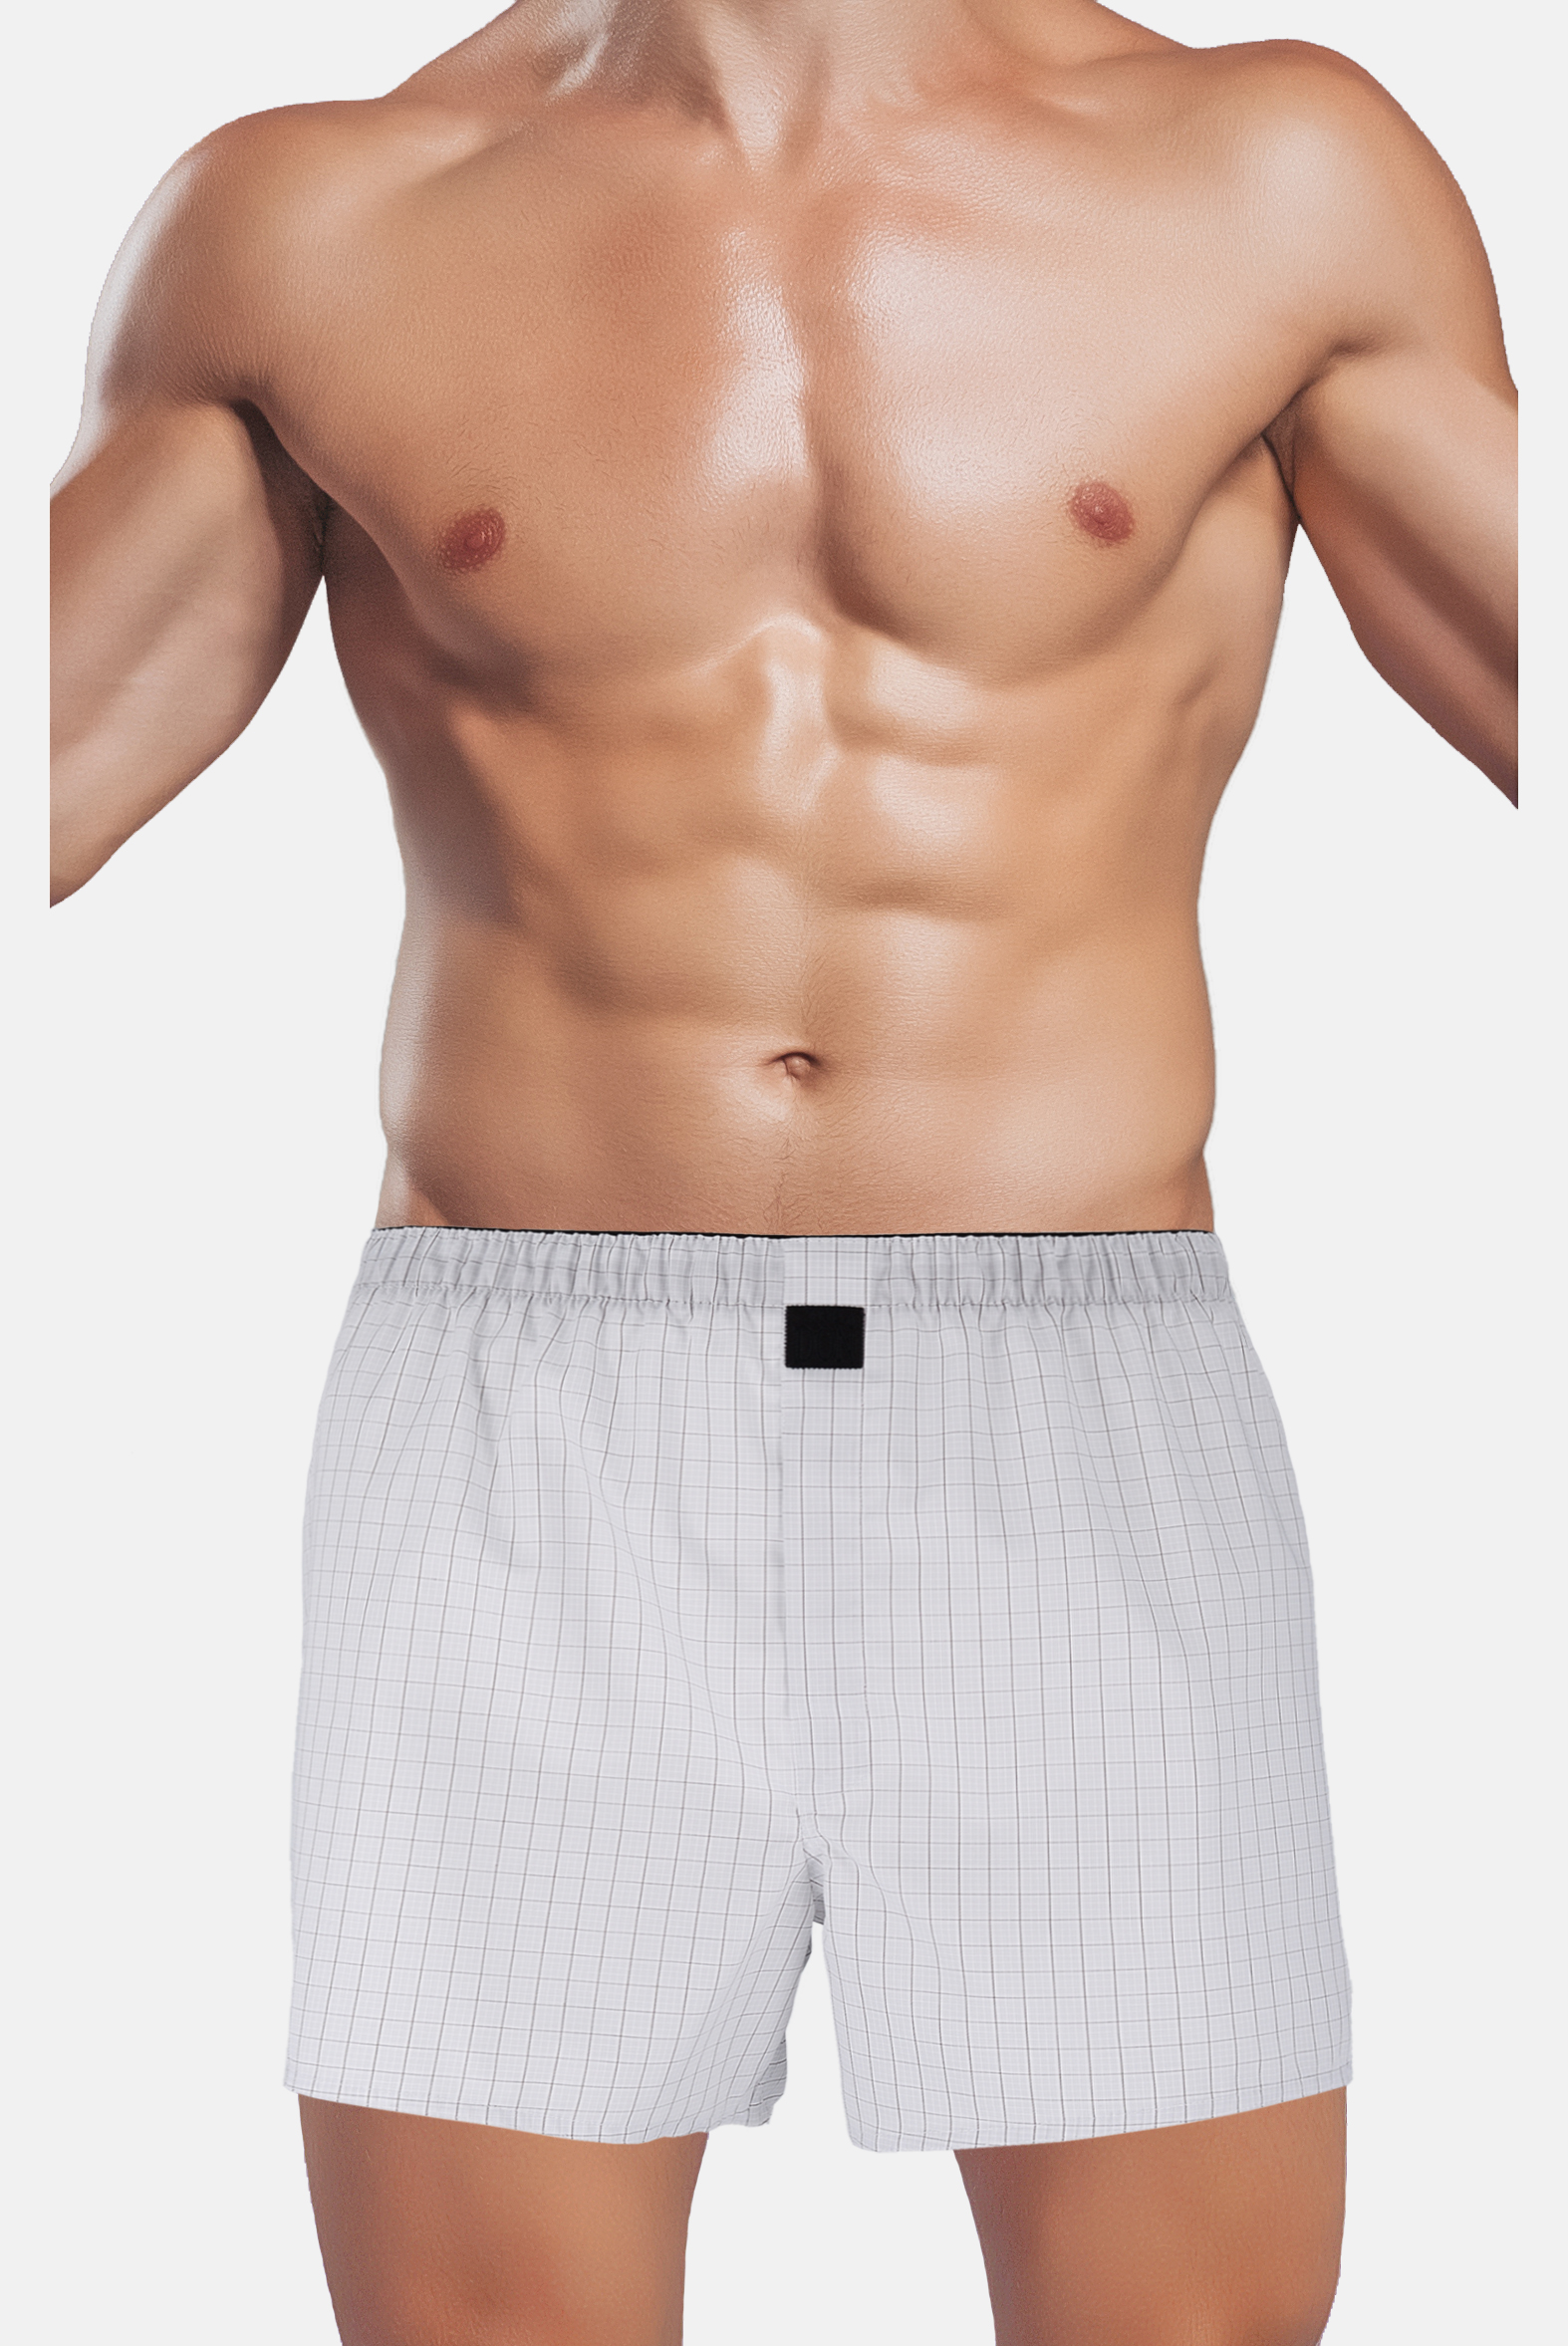 The DON Overcast Plaid Classic Boxer - The DON Mediterranean Bodywear